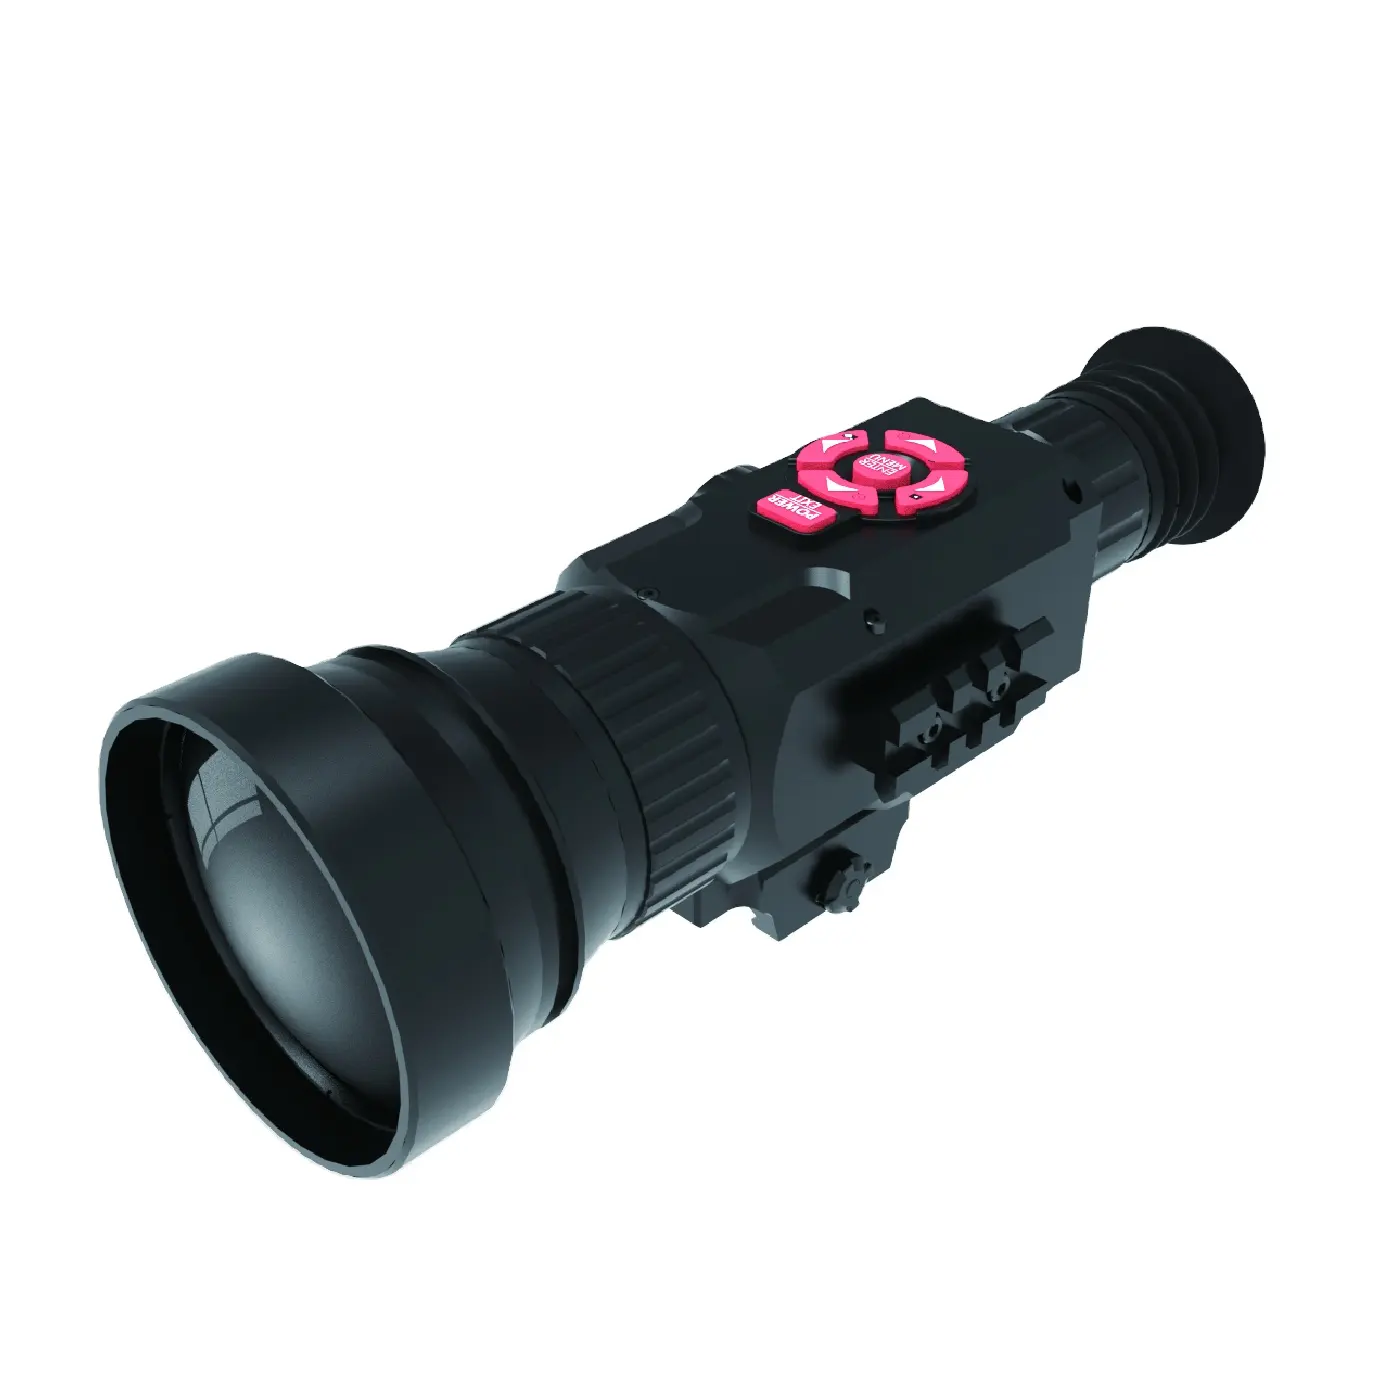 Long Range Thermal Observing Monocular Imaging Mounted Scope HTS-50 Infrared Thermal Scope for Hunting